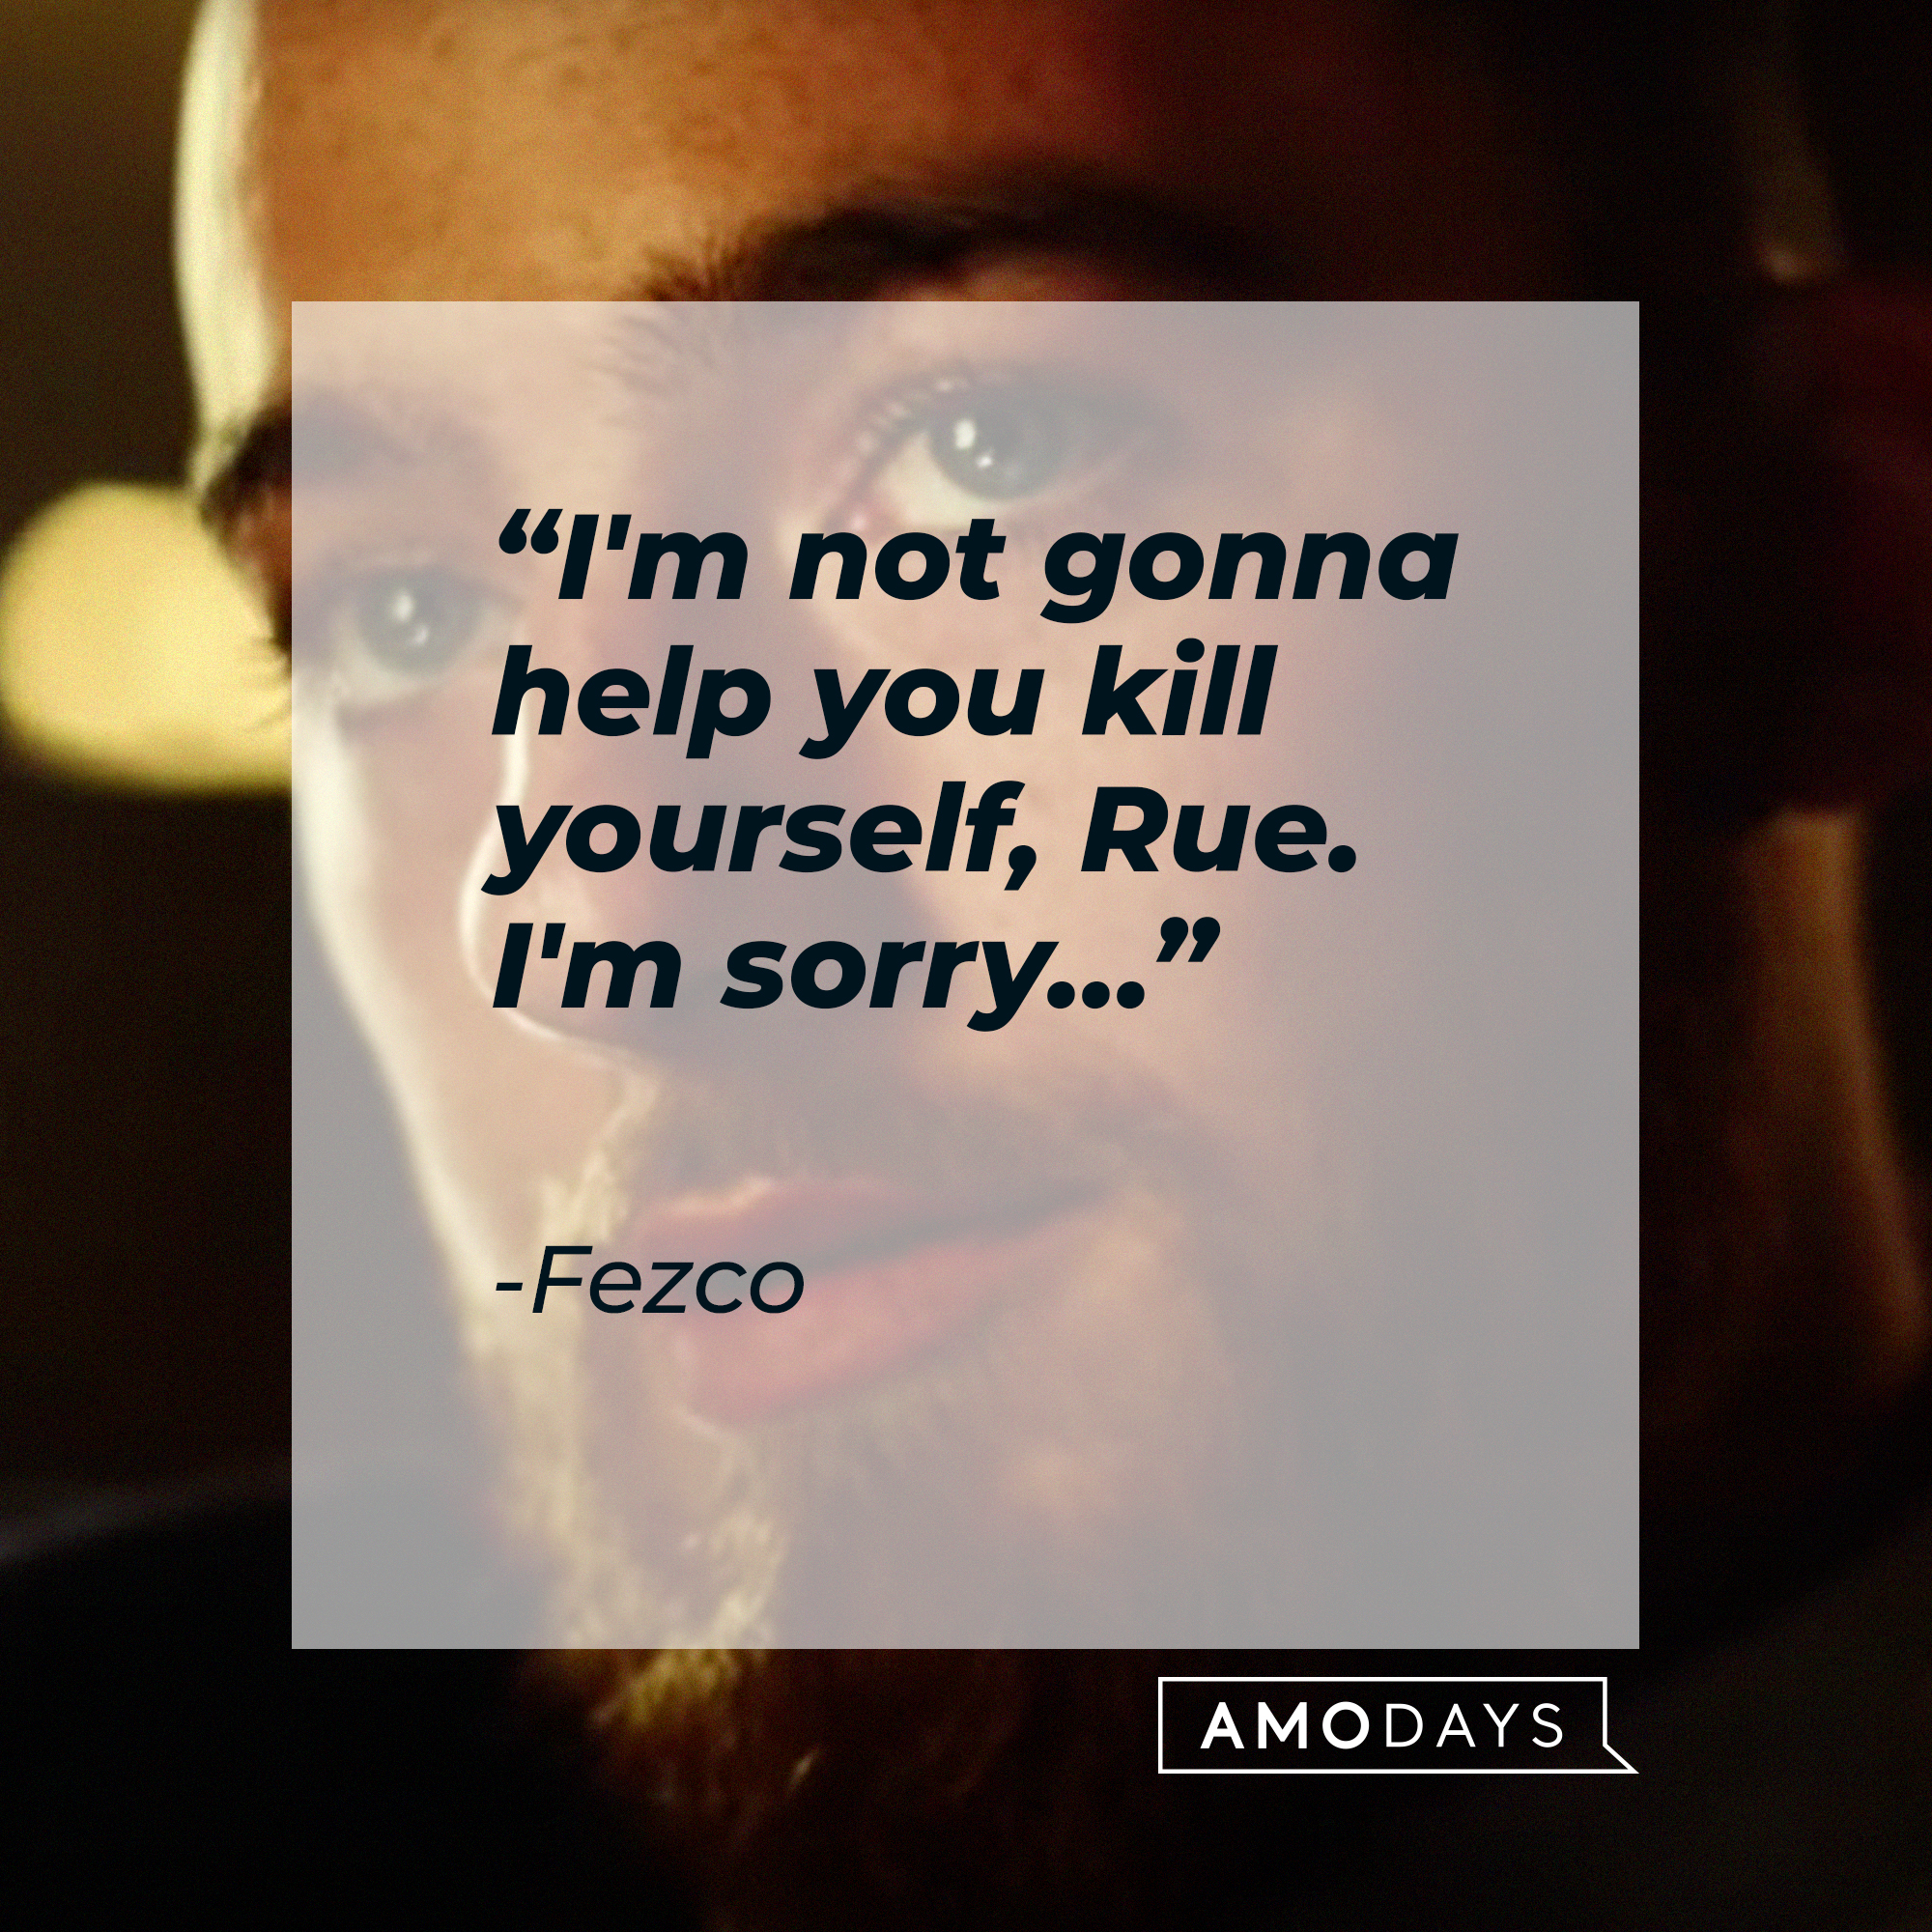 Fezco, with his quote: “I'm not gonna help you kill yourself, Rue. I'm sorry.”| Source: youtube.com/EuphoriaHBO